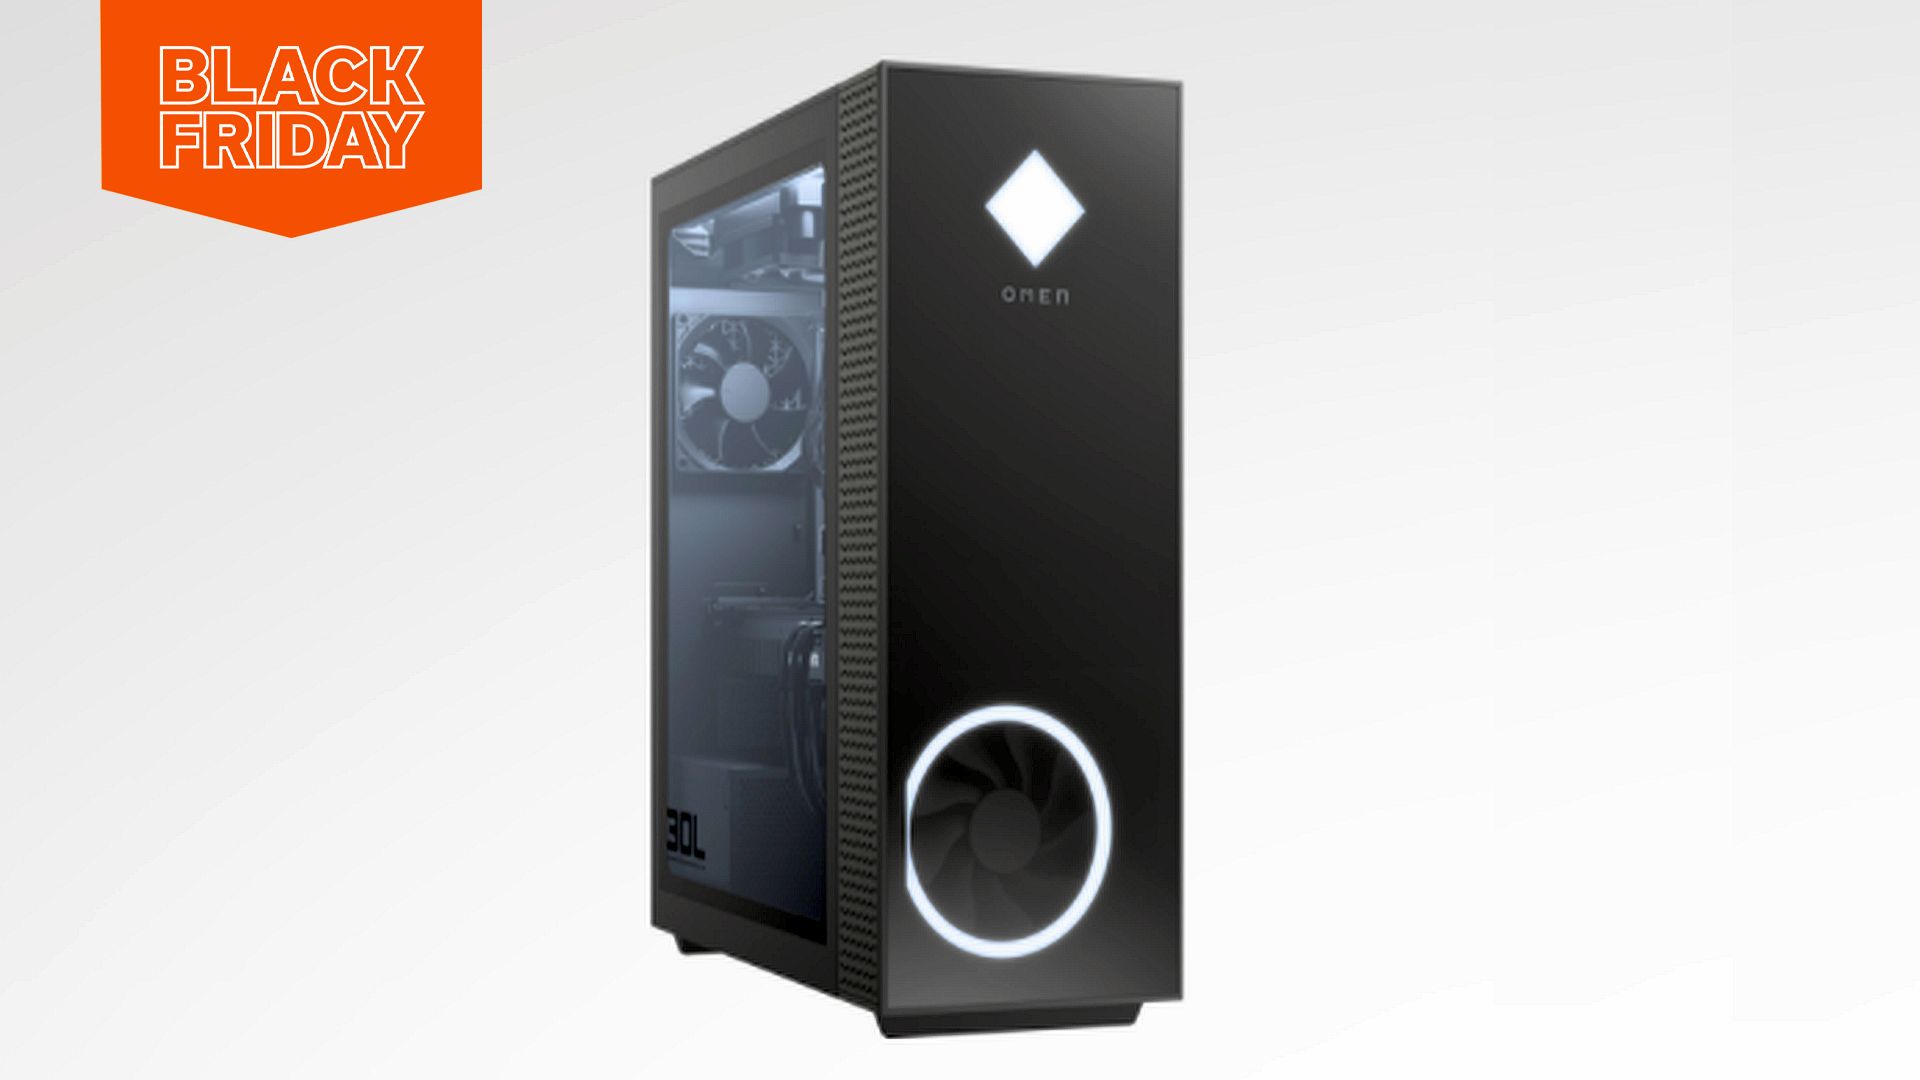 Save $100 on this Omen 30L gaming PC powered by an Nvidia RTX 3080 GPU